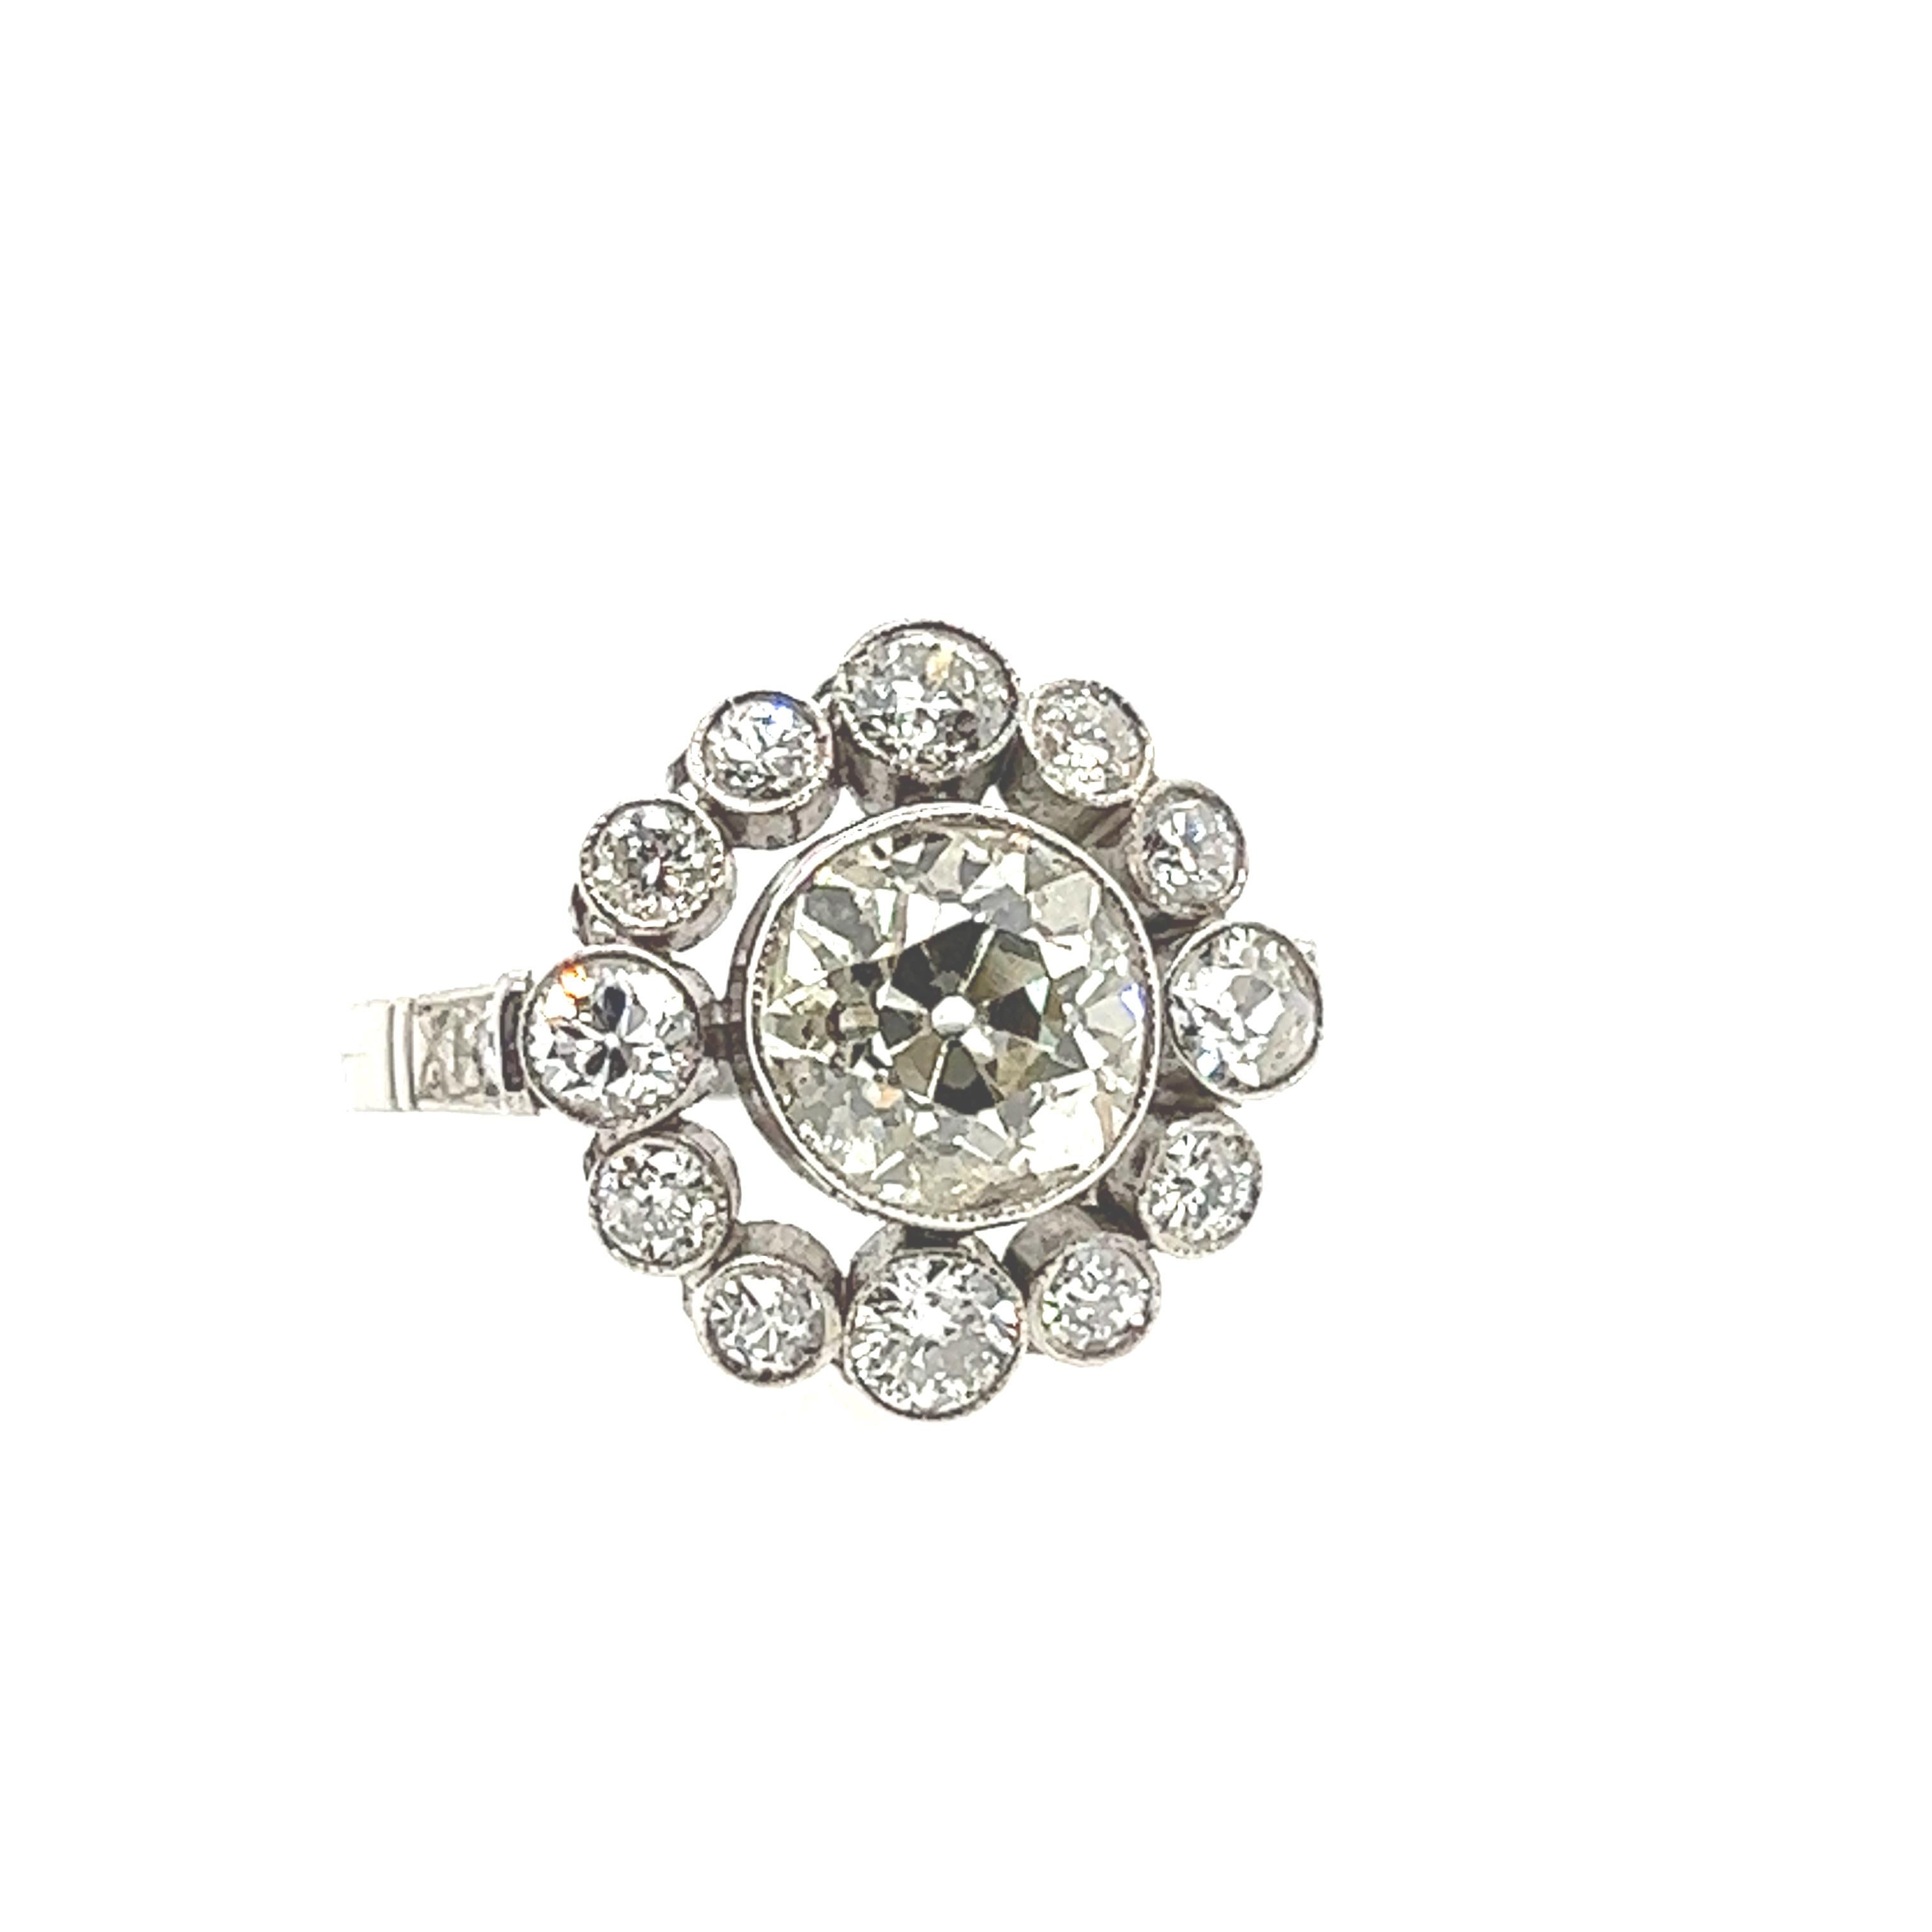 This exceptional antique diamond ring from the 1940s is a true work of art from the Art Deco period. The centerpiece of the ring is a magnificent 1.90-carat European cut diamond, which sparkles brilliantly. Surrounding the center stone are 12